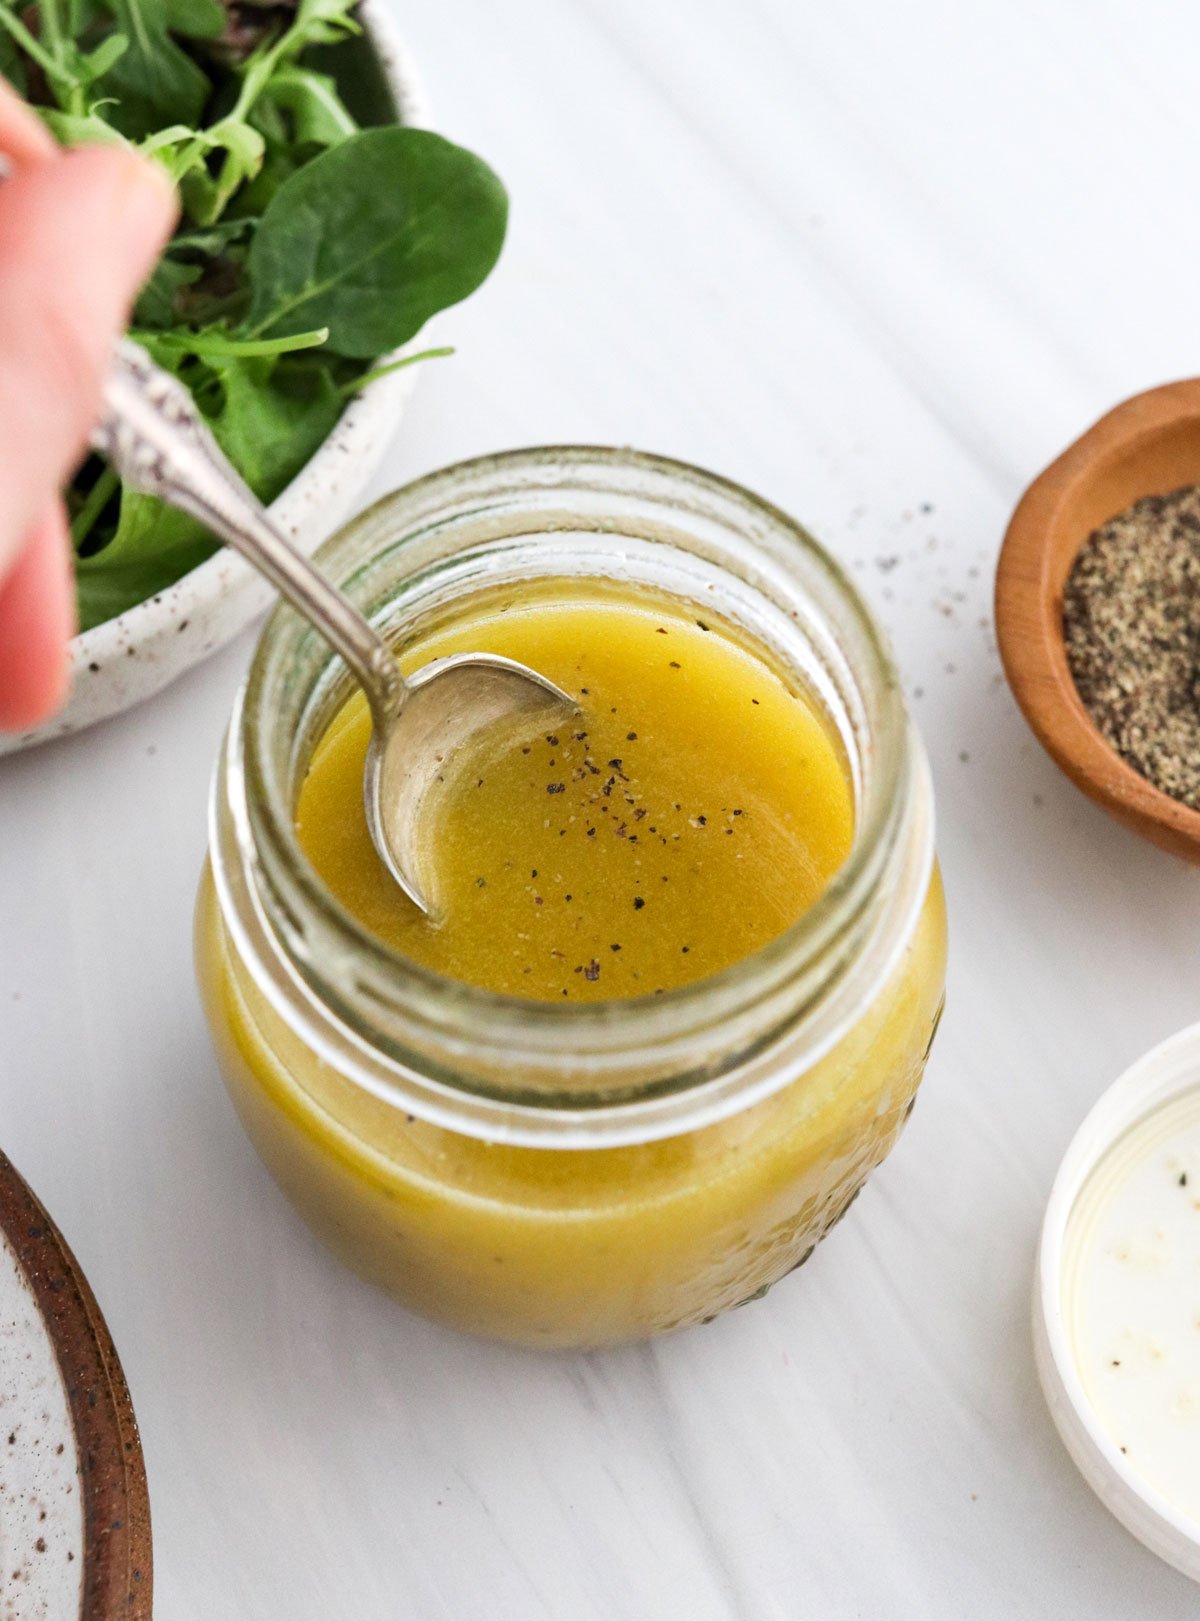 spoon added to jar of apple cider dressing